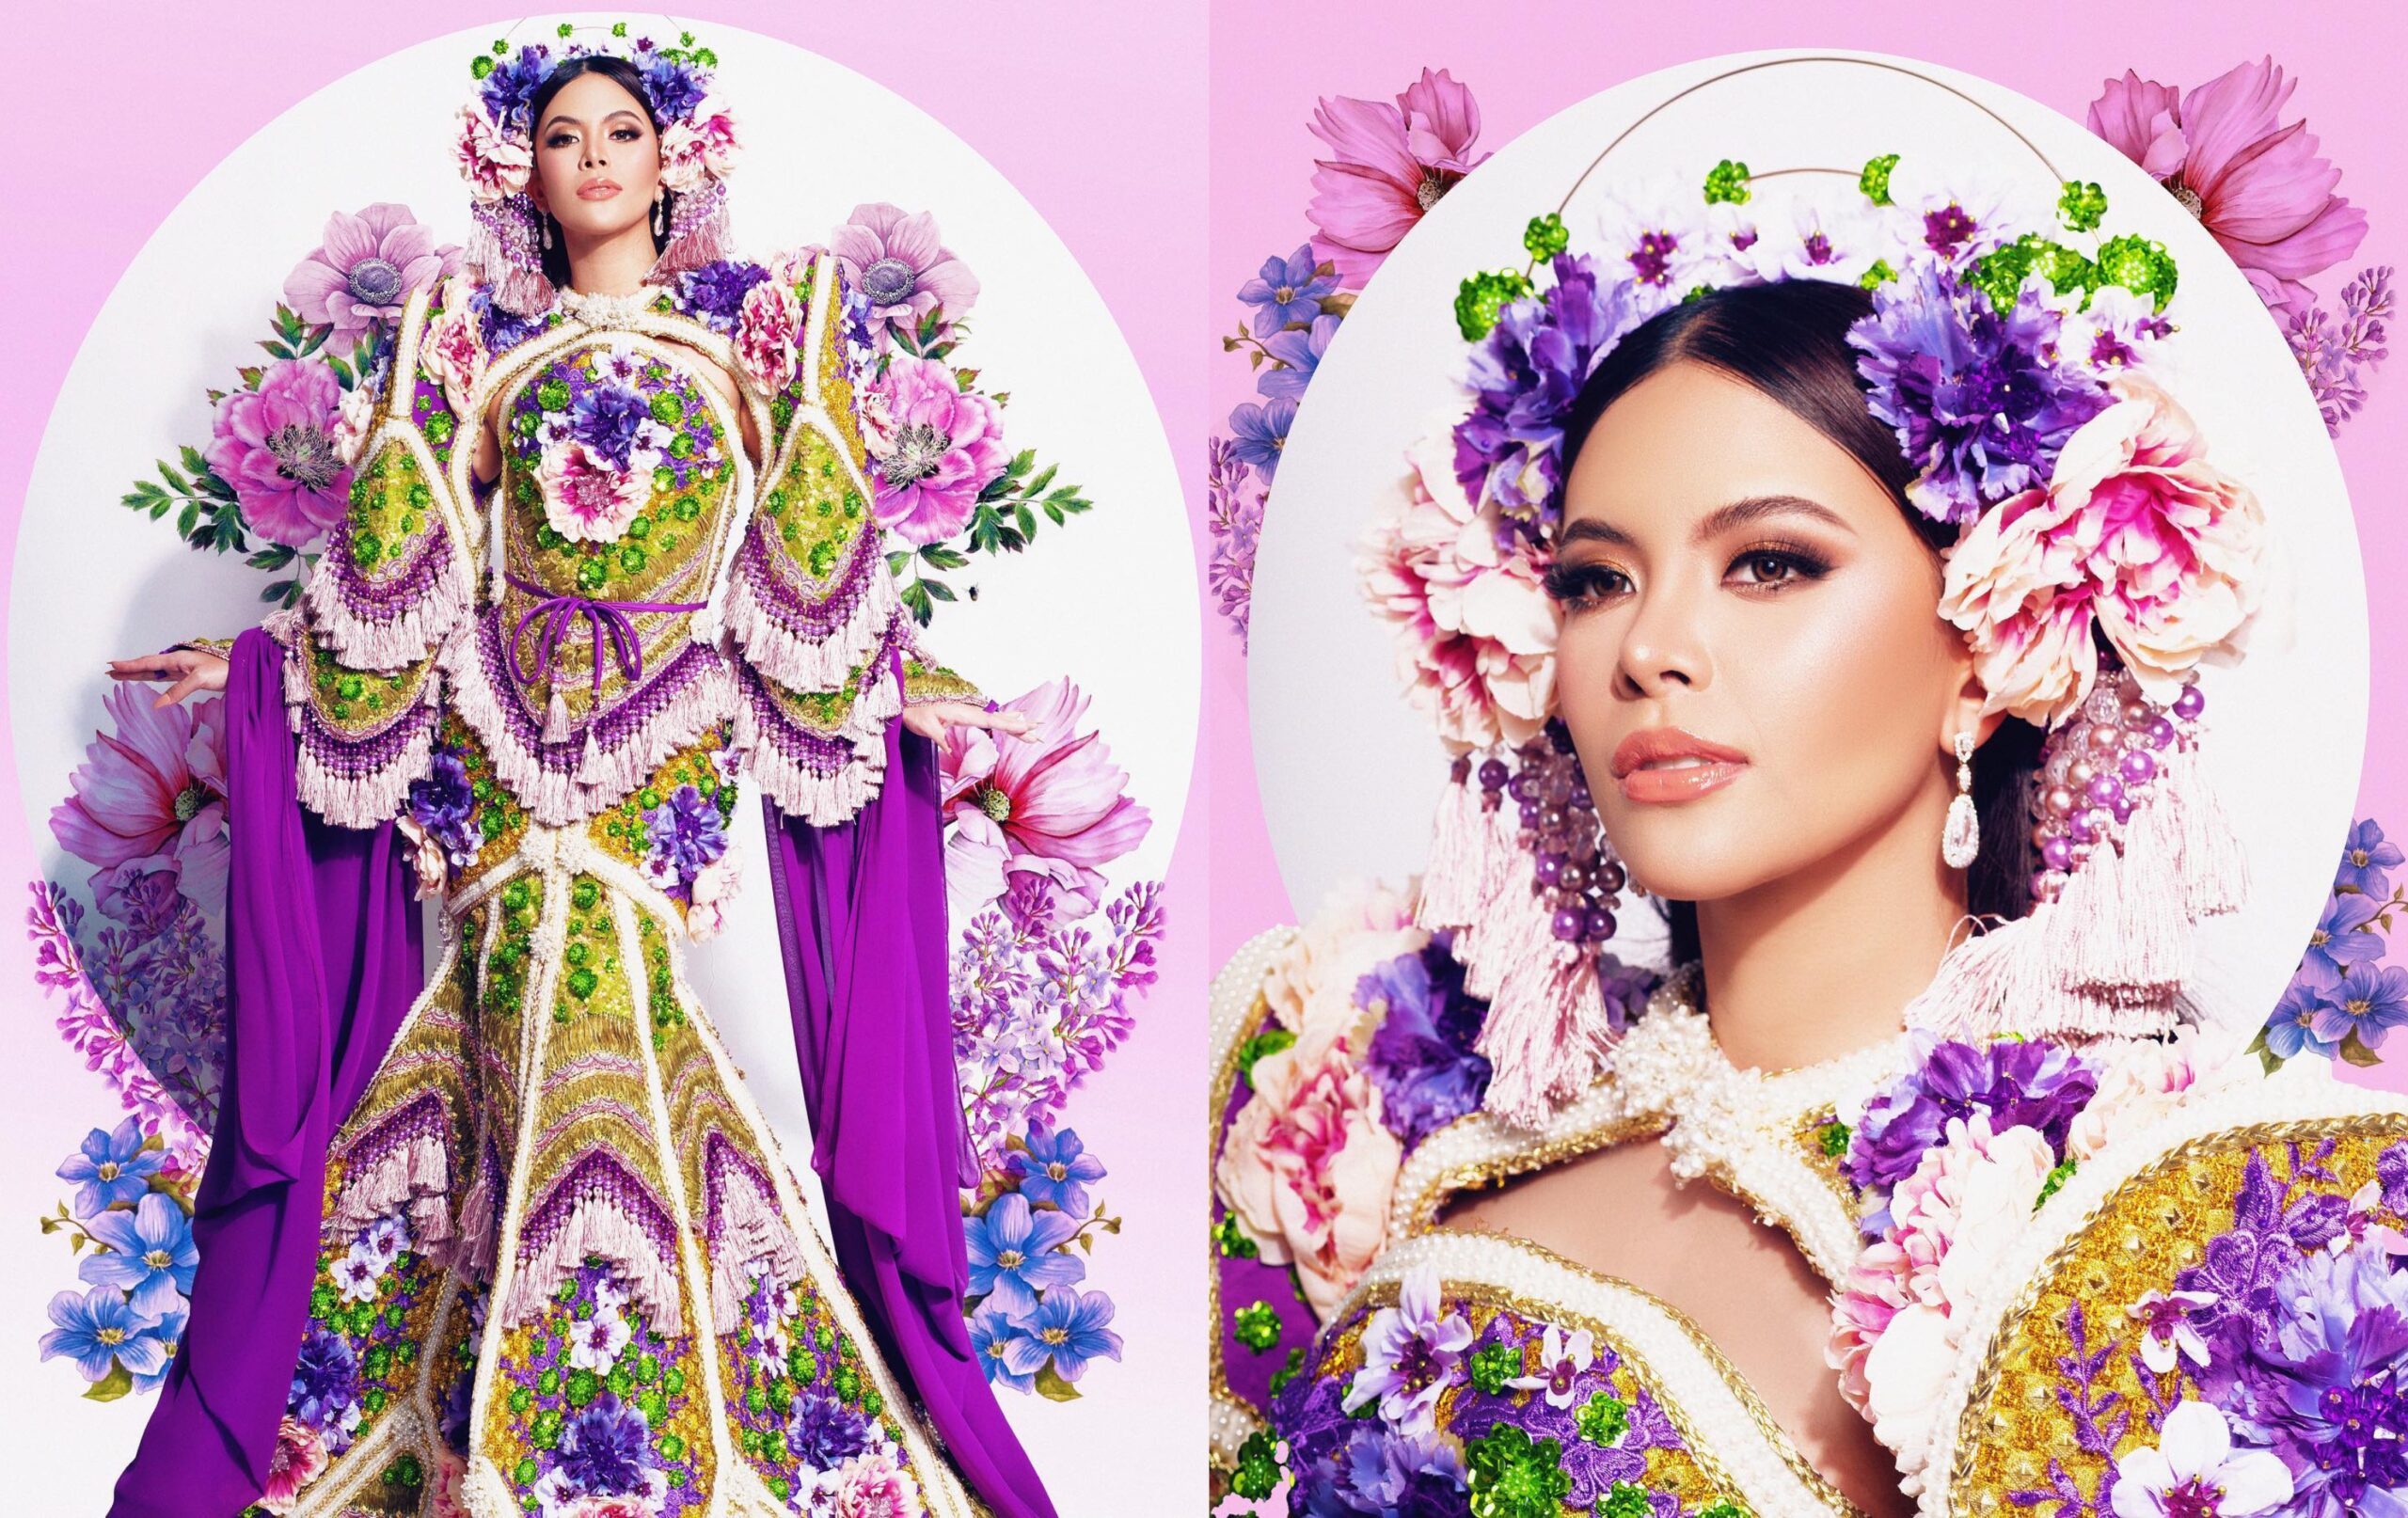 LOOK: Tracy Maureen Perez is a moon goddess in national costume for Miss World 2021